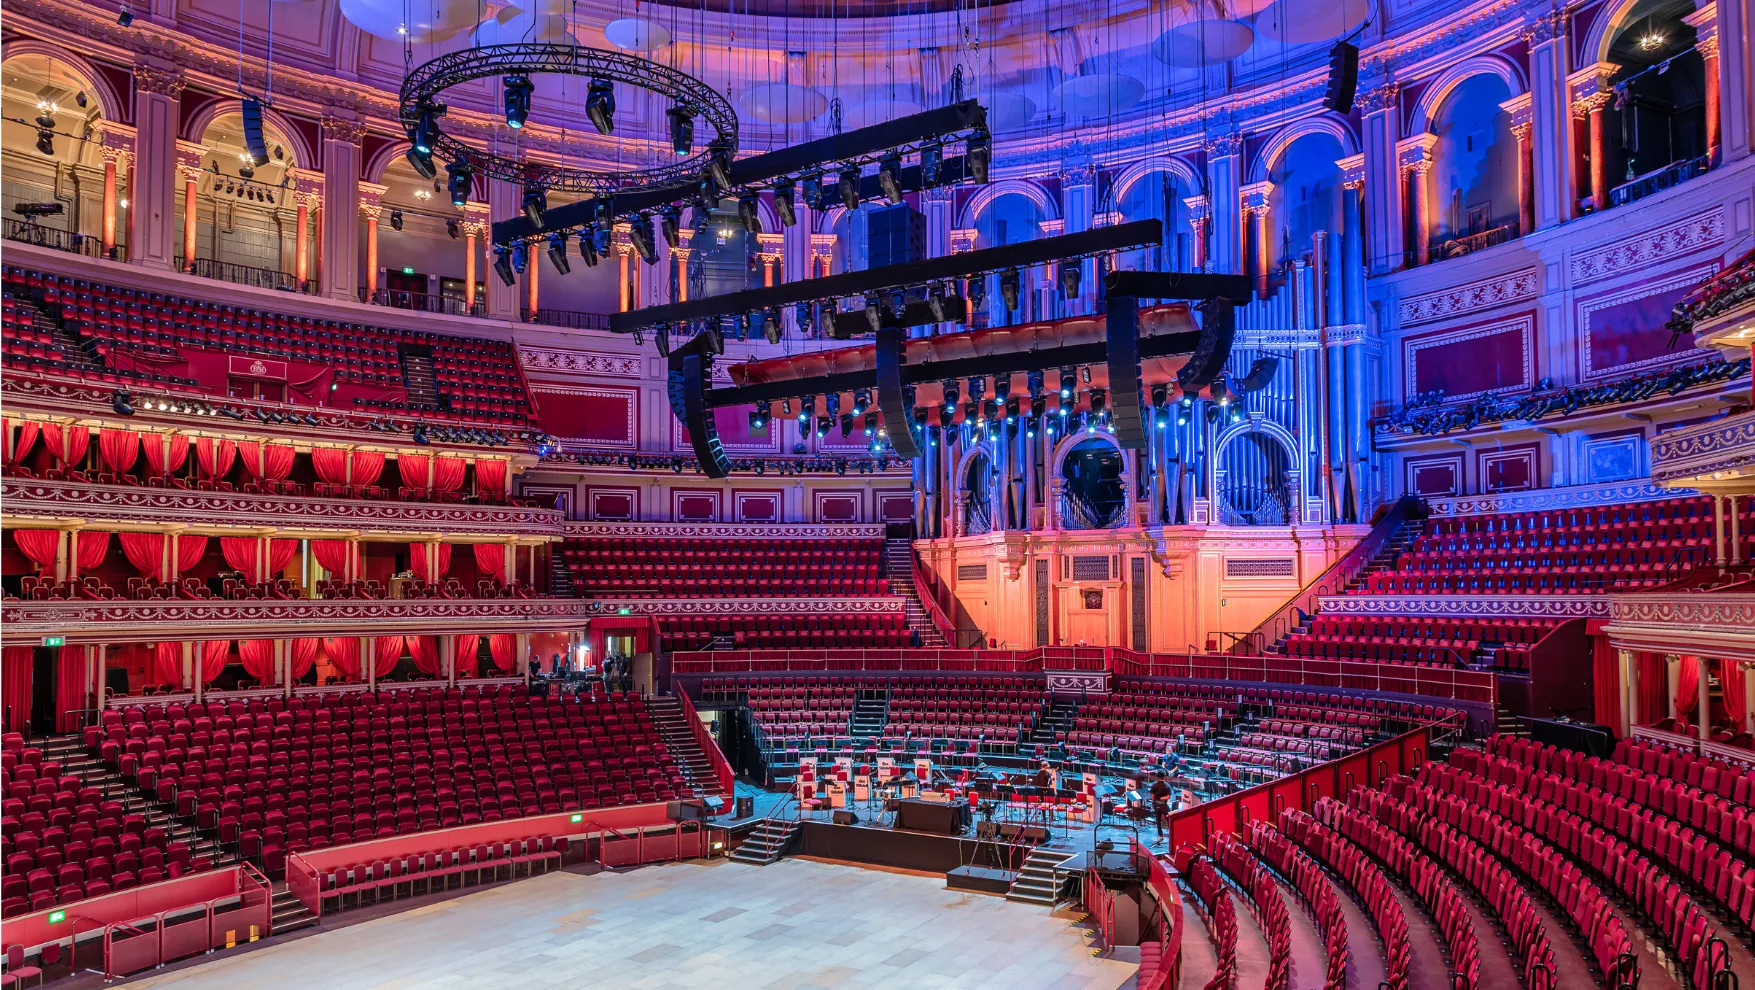 The stage and the oval shaped auditorium of the Royal Albert Hall in South Kensington